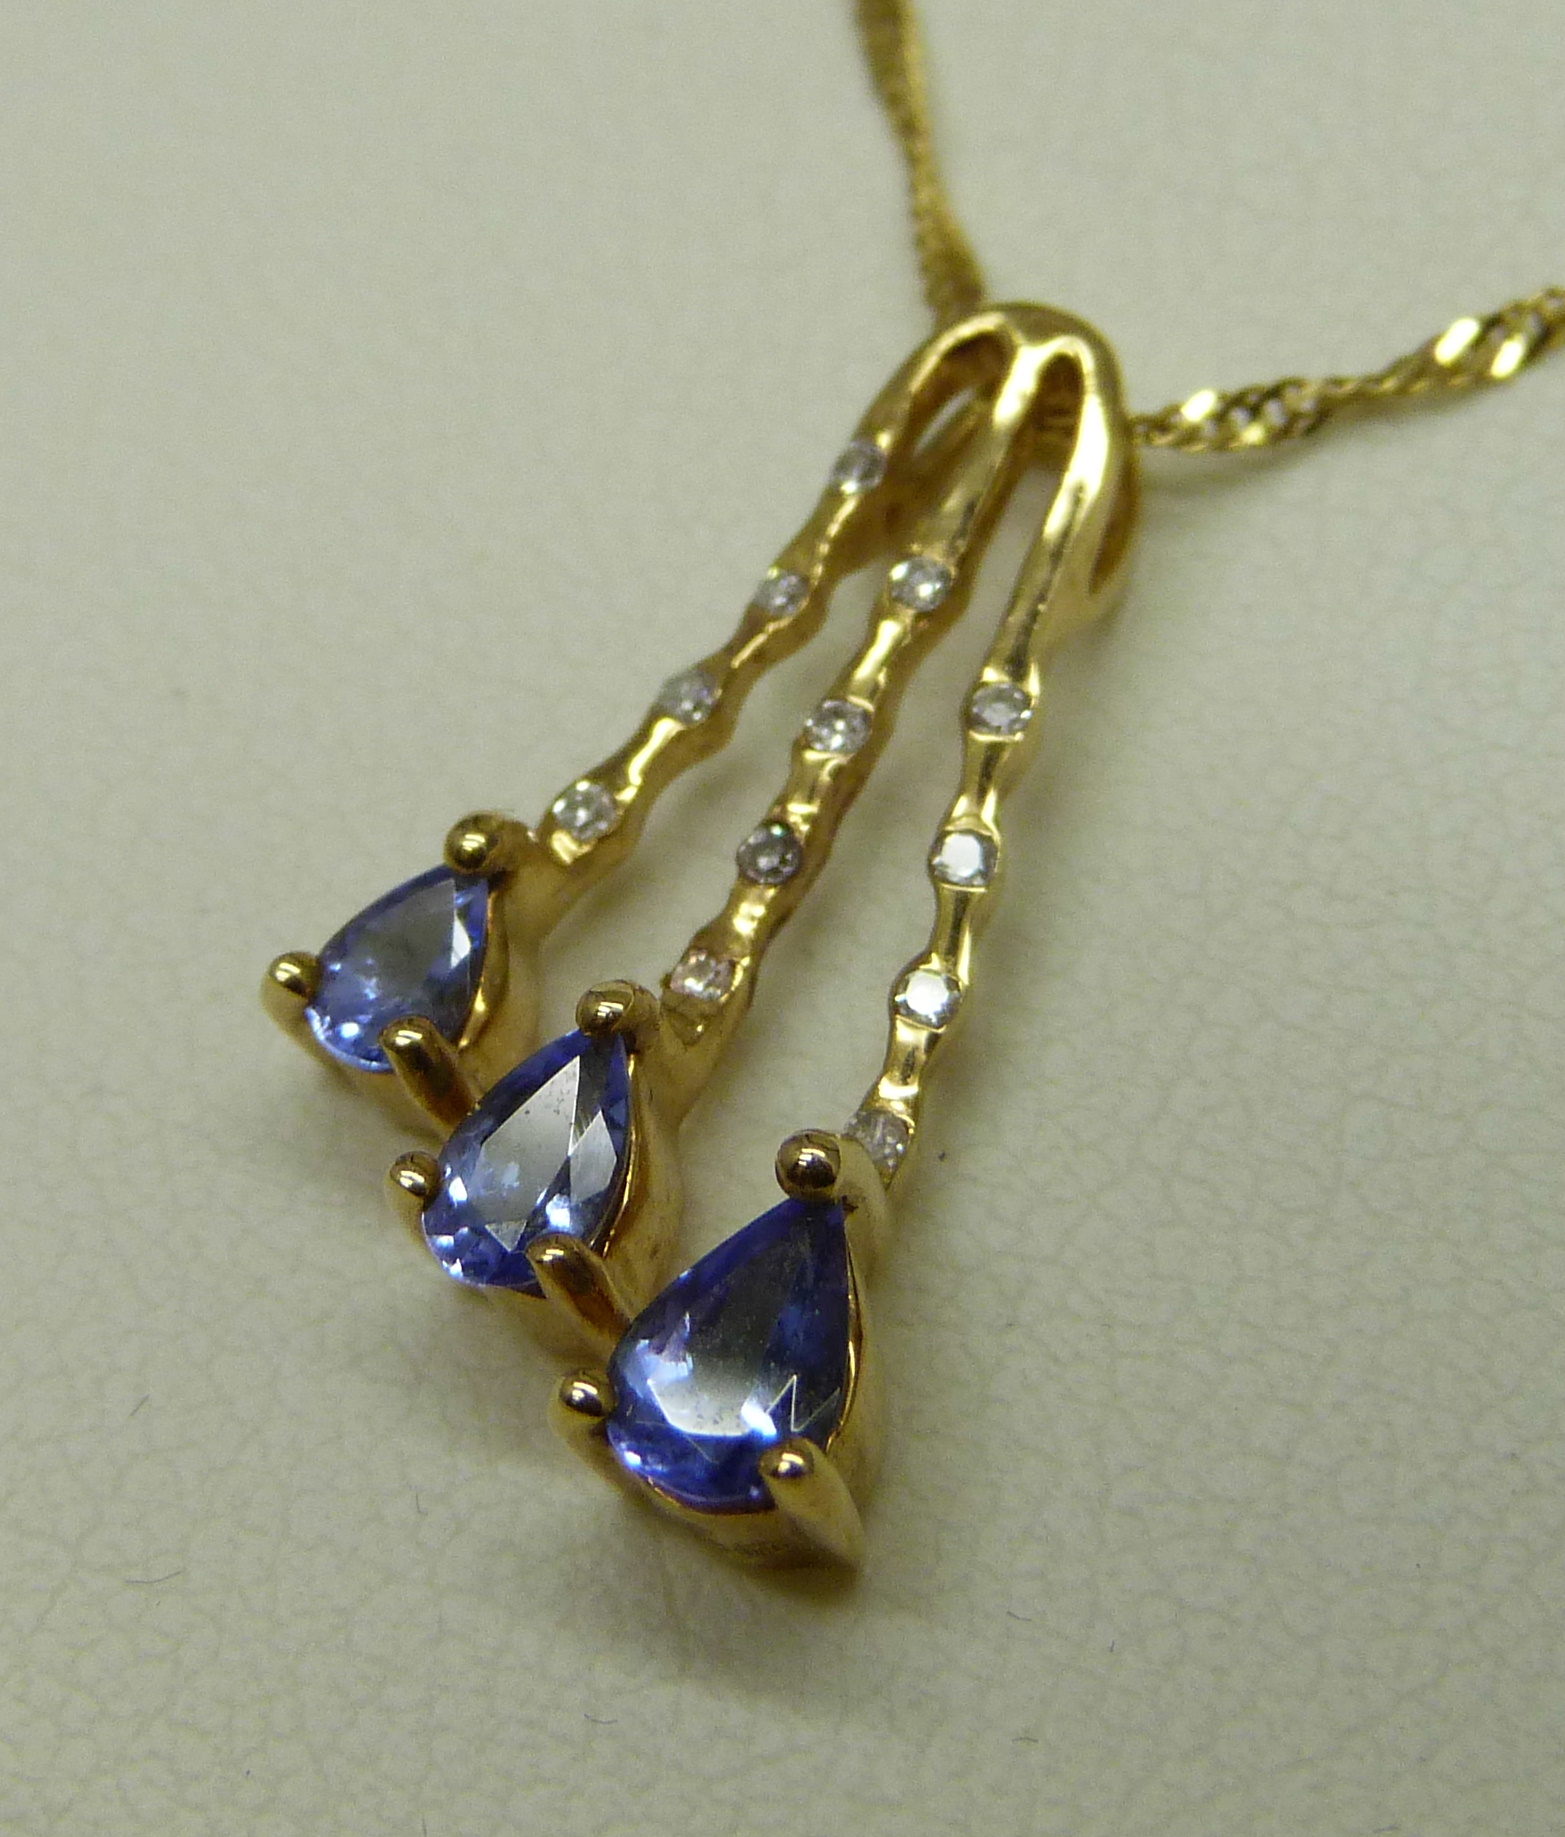 An 18ct yellow gold pendant set with small diamonds and three pear shape grade AAA tanzanite stones, - Image 3 of 6